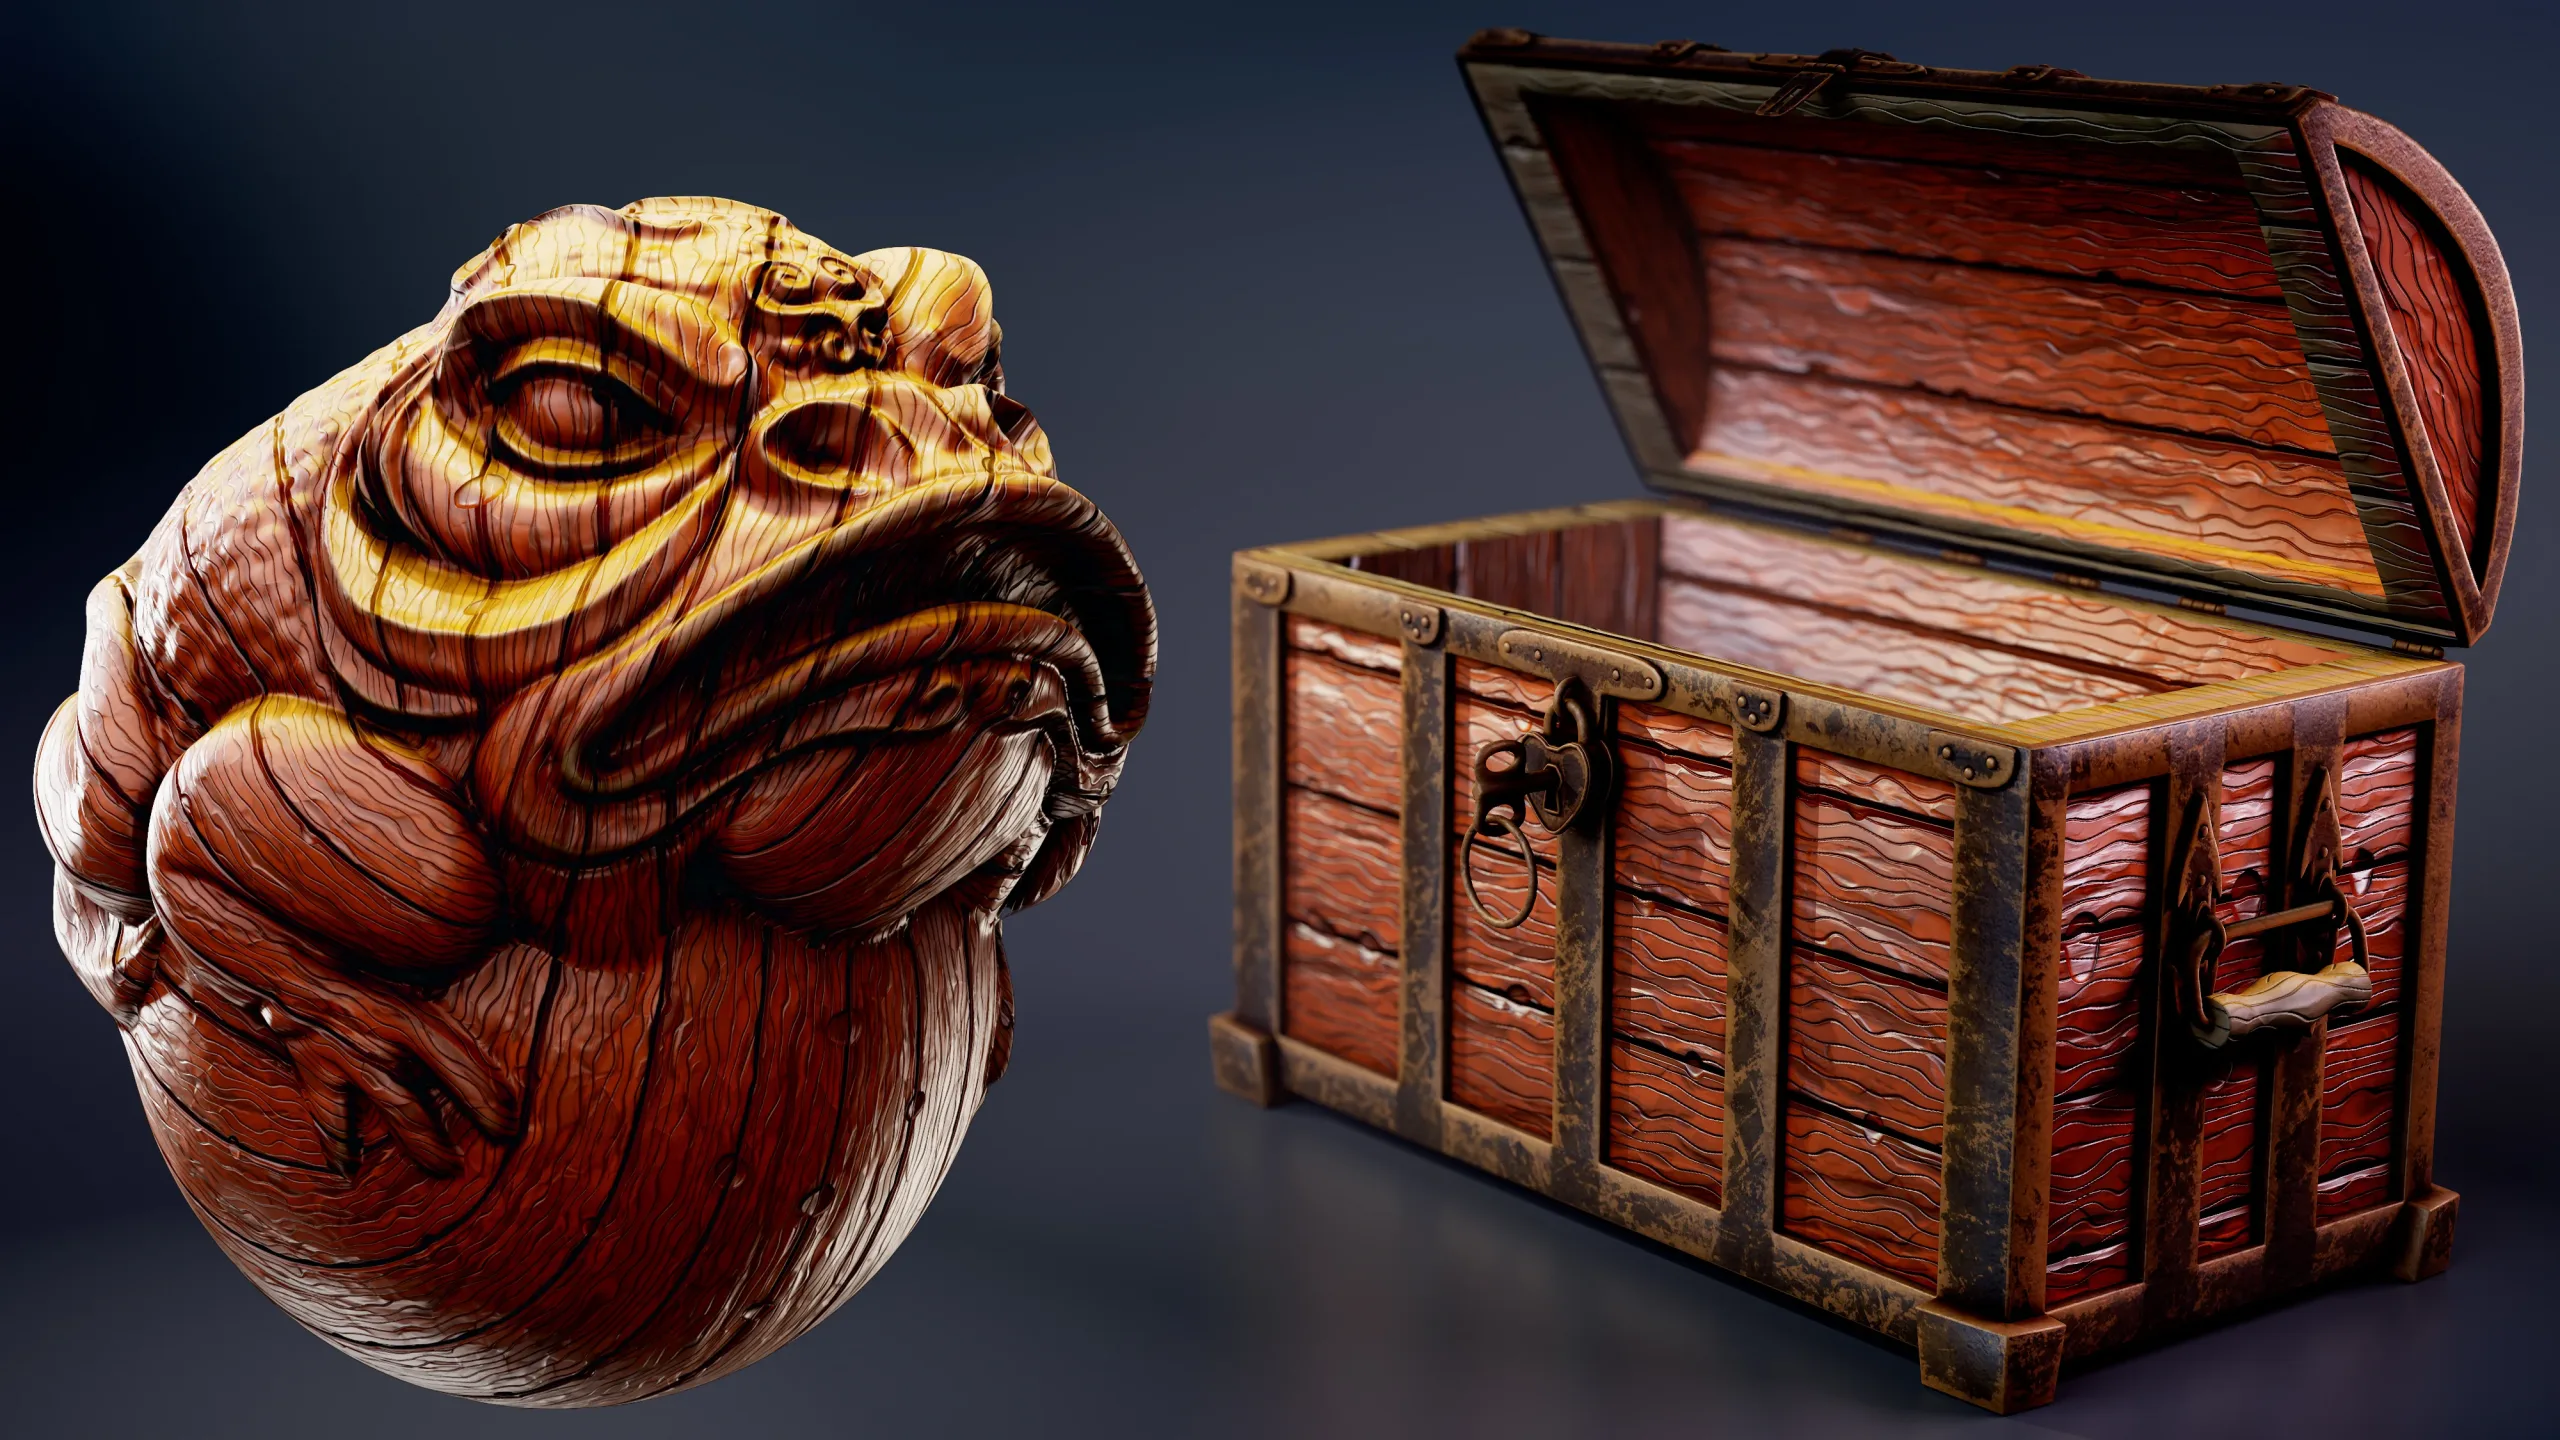 40 Stylized Wood-Metal Smart Material+ 4K PBR Textures + Tutorial